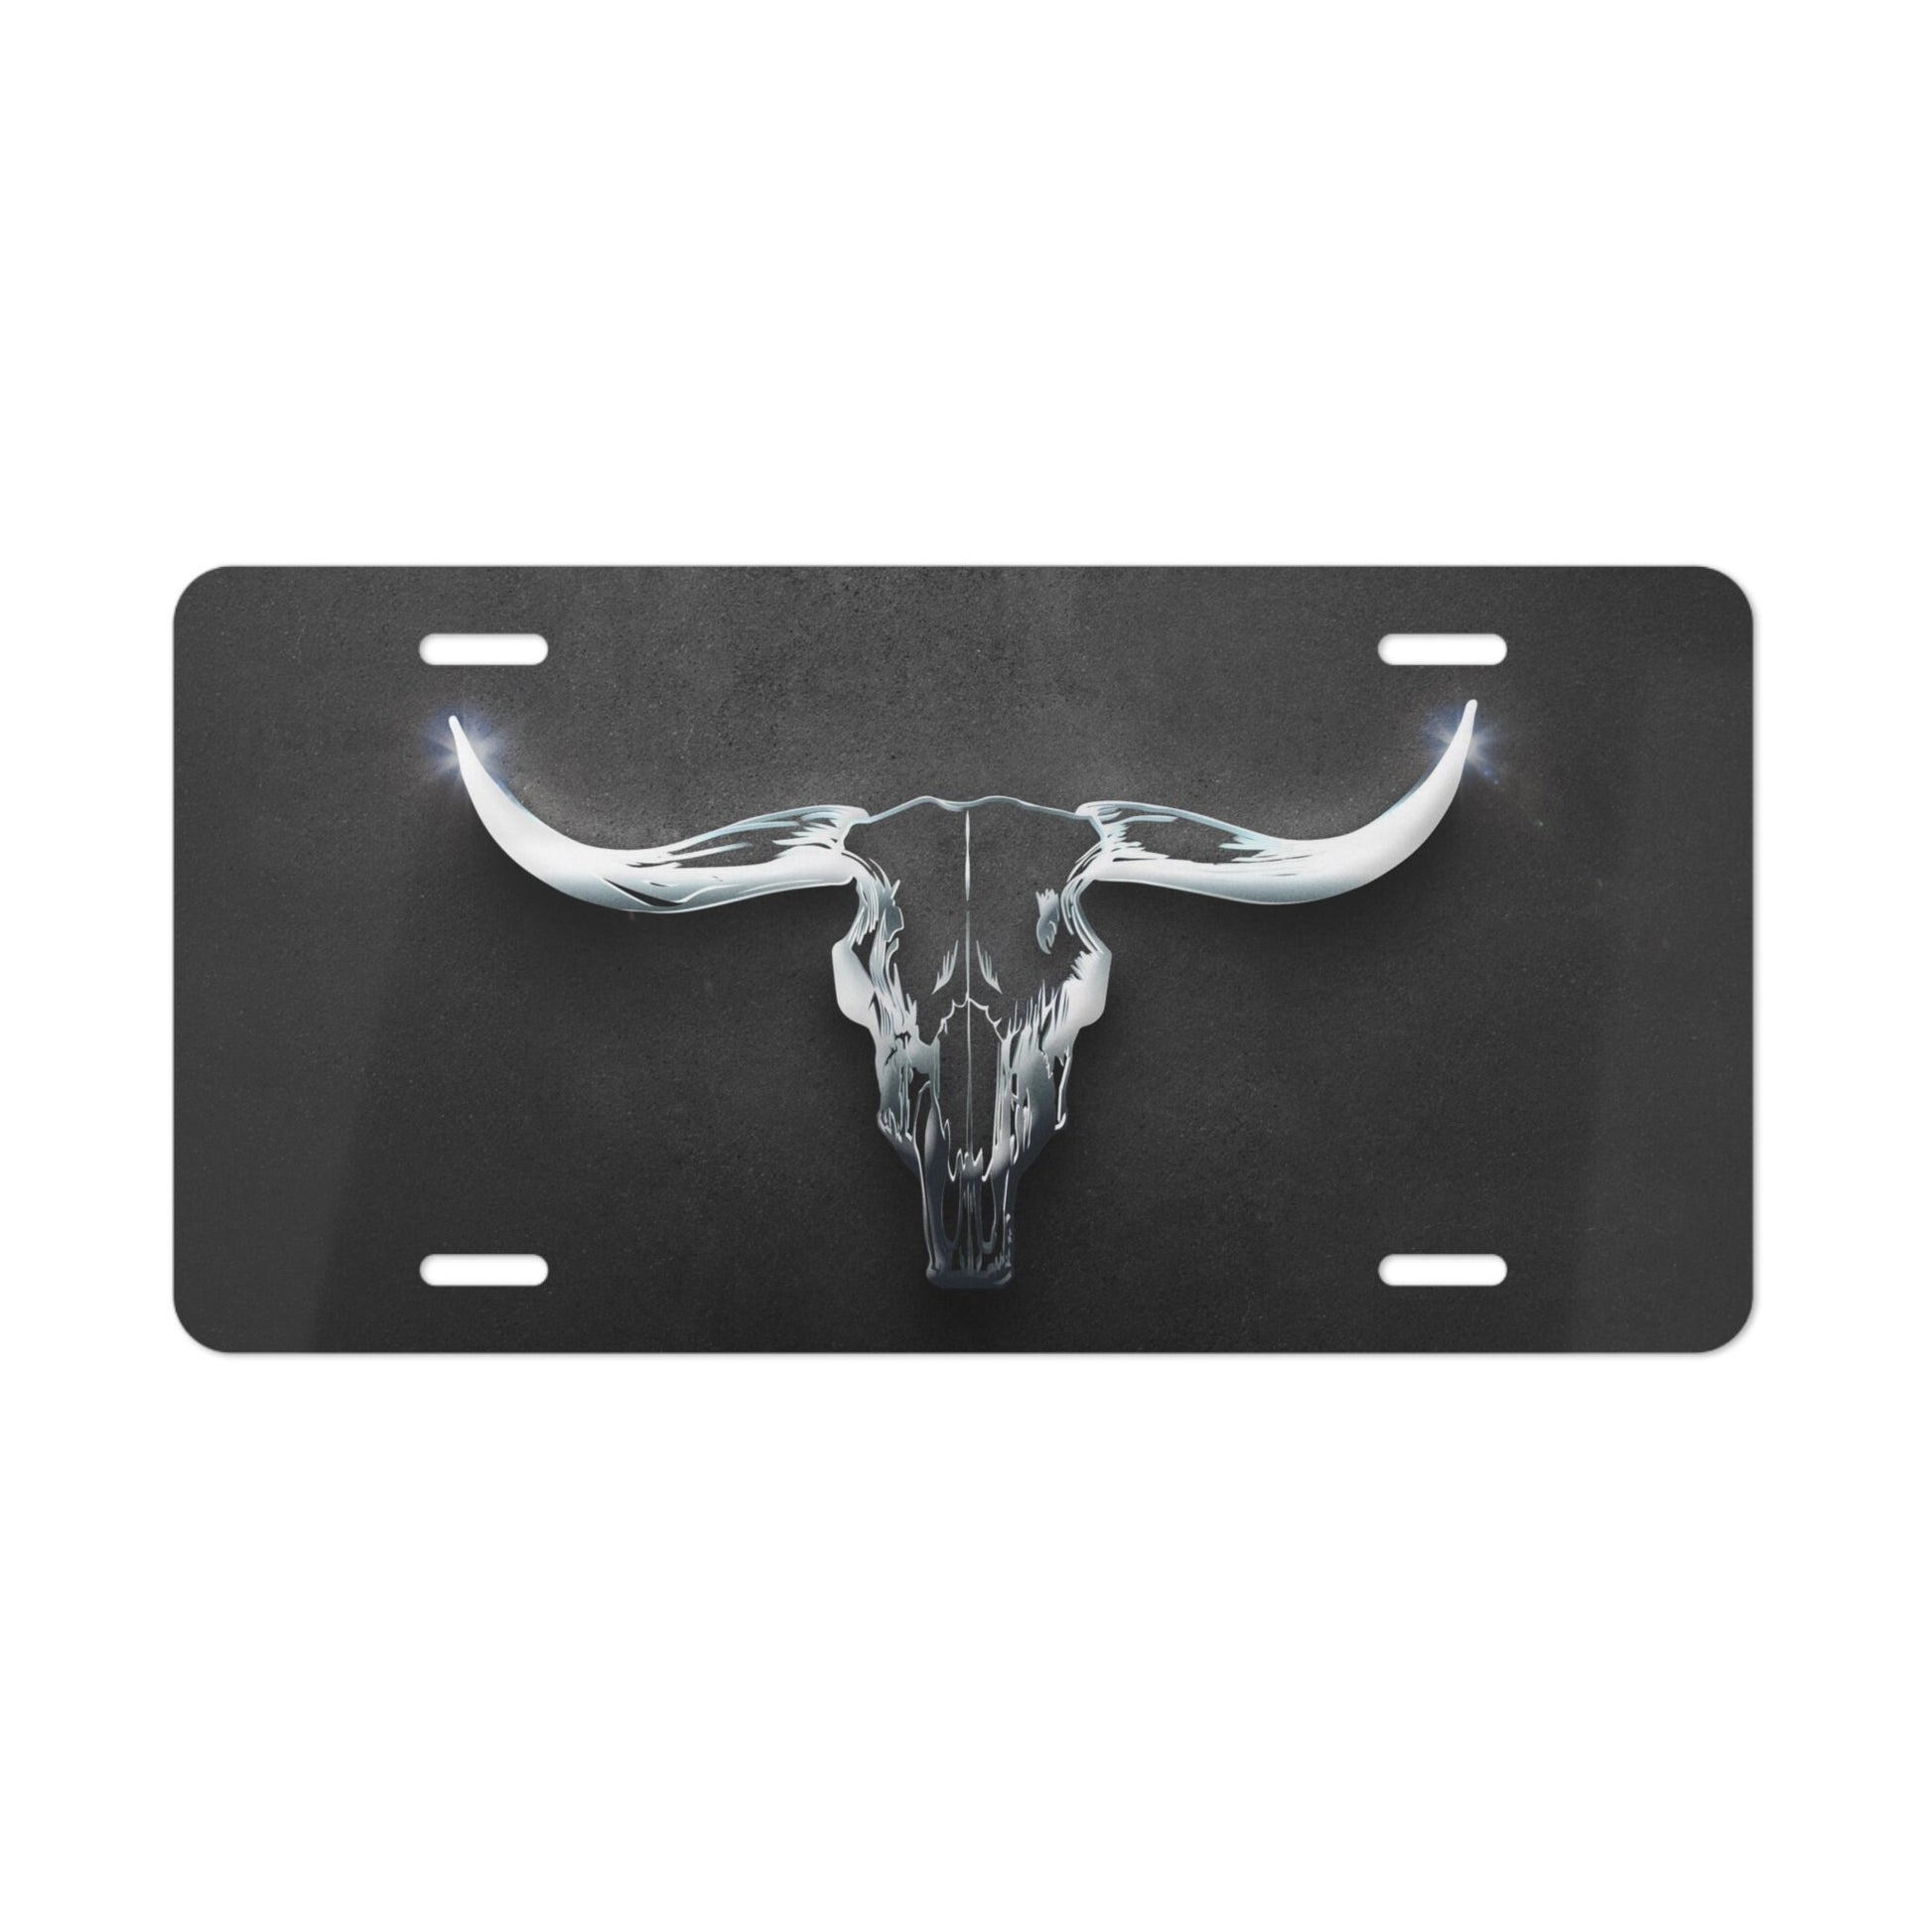 Longhorn License Plate Cowboy Western Rancher Livestock Producer Chrome Looking License Plate for Car or Truck Accessories